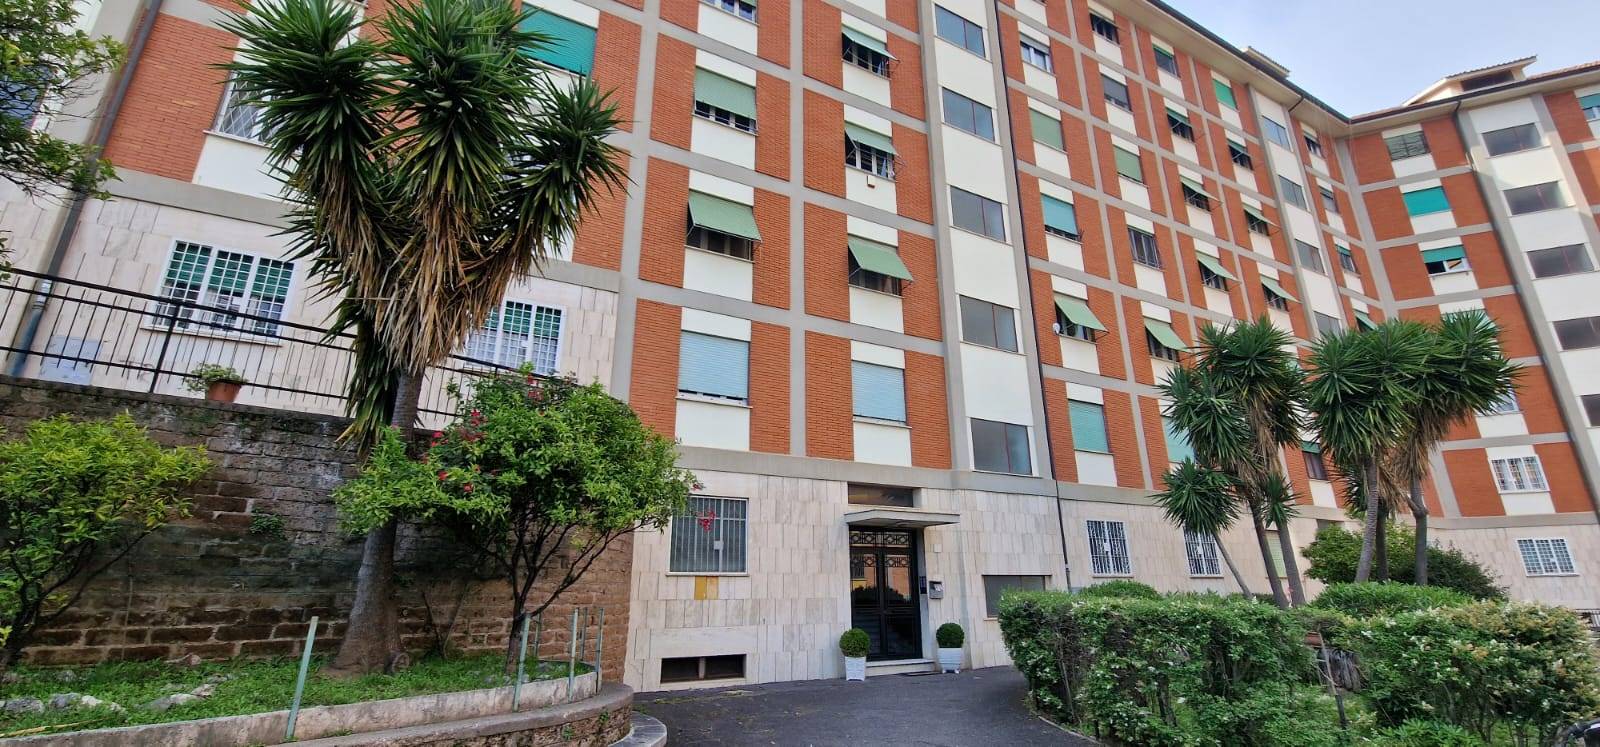 TORRE SPACCATA, ROMA, Apartment for rent of 15 Sq. mt., Good condition, Heating Individual heating system, Energetic class: G, placed at 3°, composed 